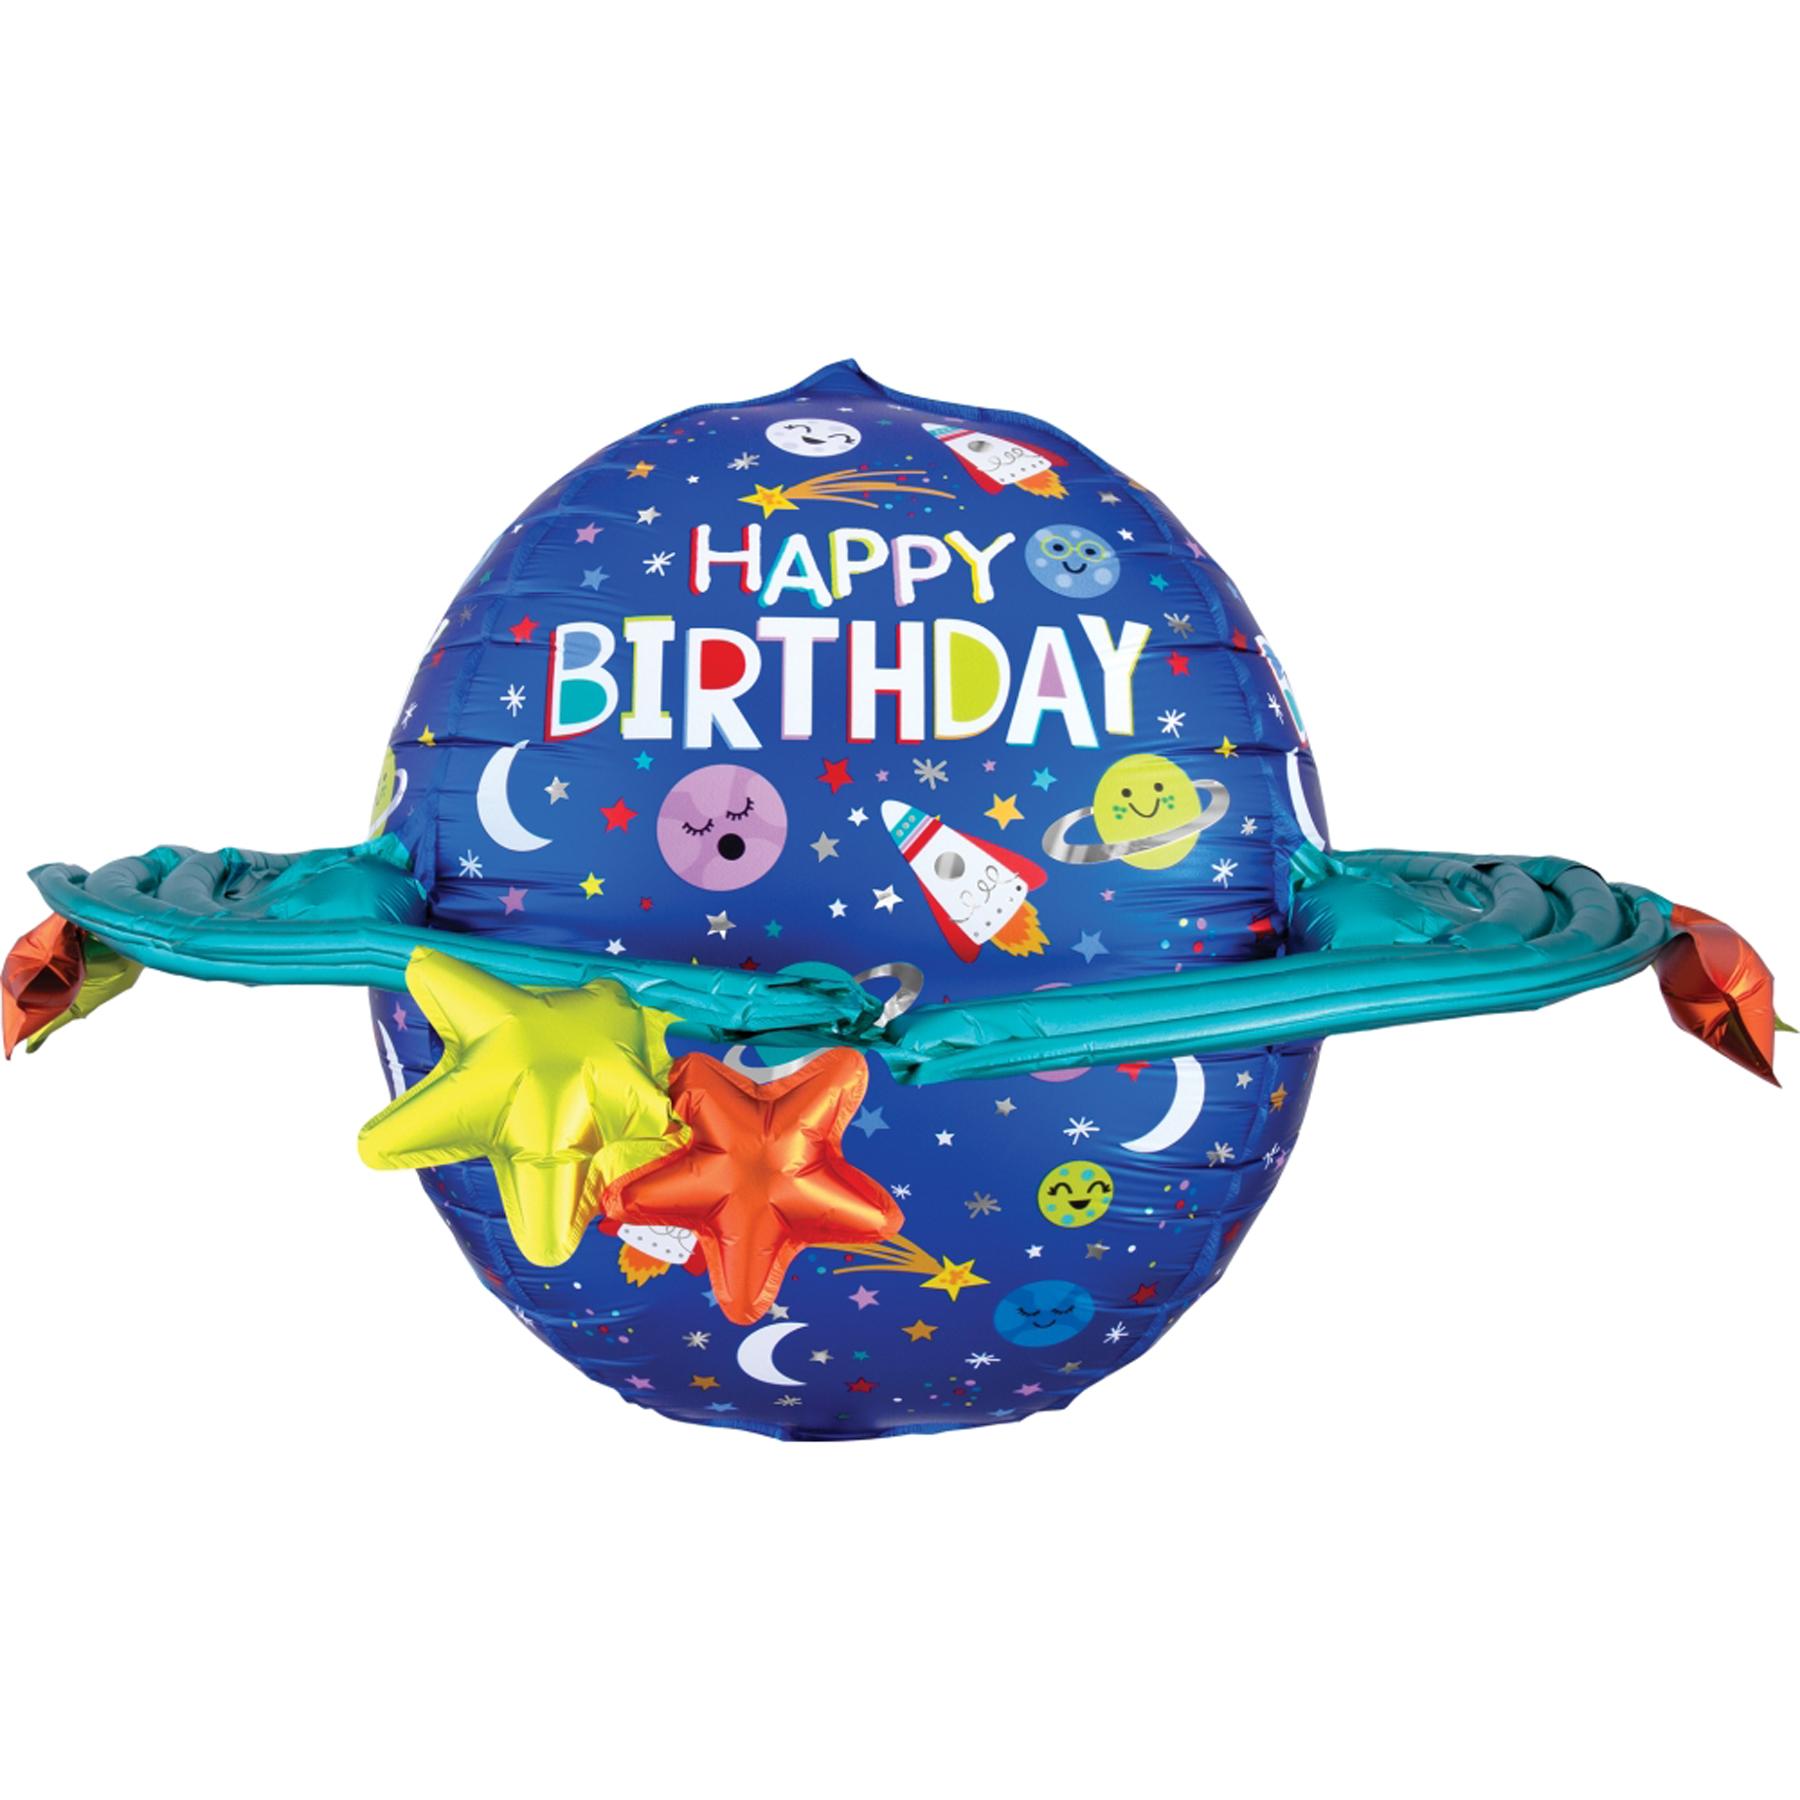 Happy Birthday Colorful Galaxy Ultrashape Balloon 73x50cm Balloons & Streamers - Party Centre